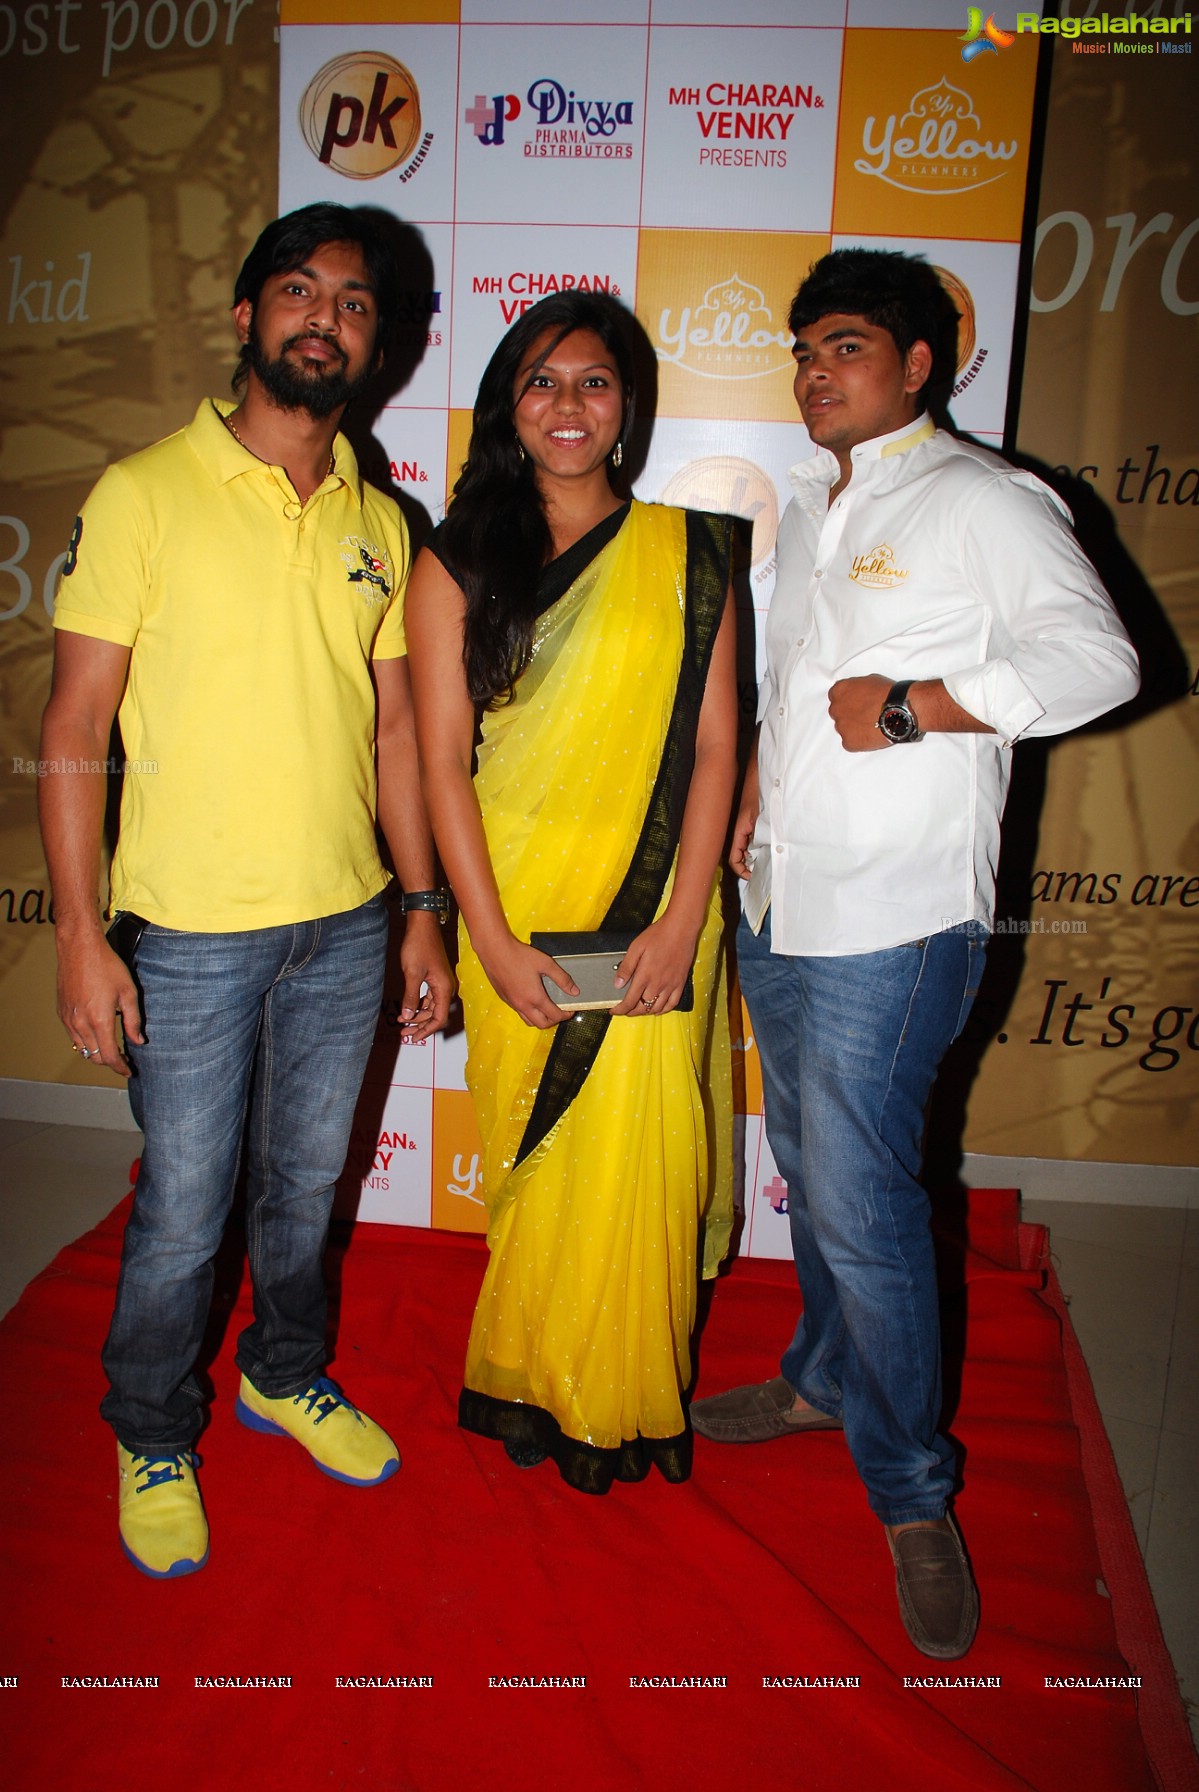 PK Screening by Yellow Planners